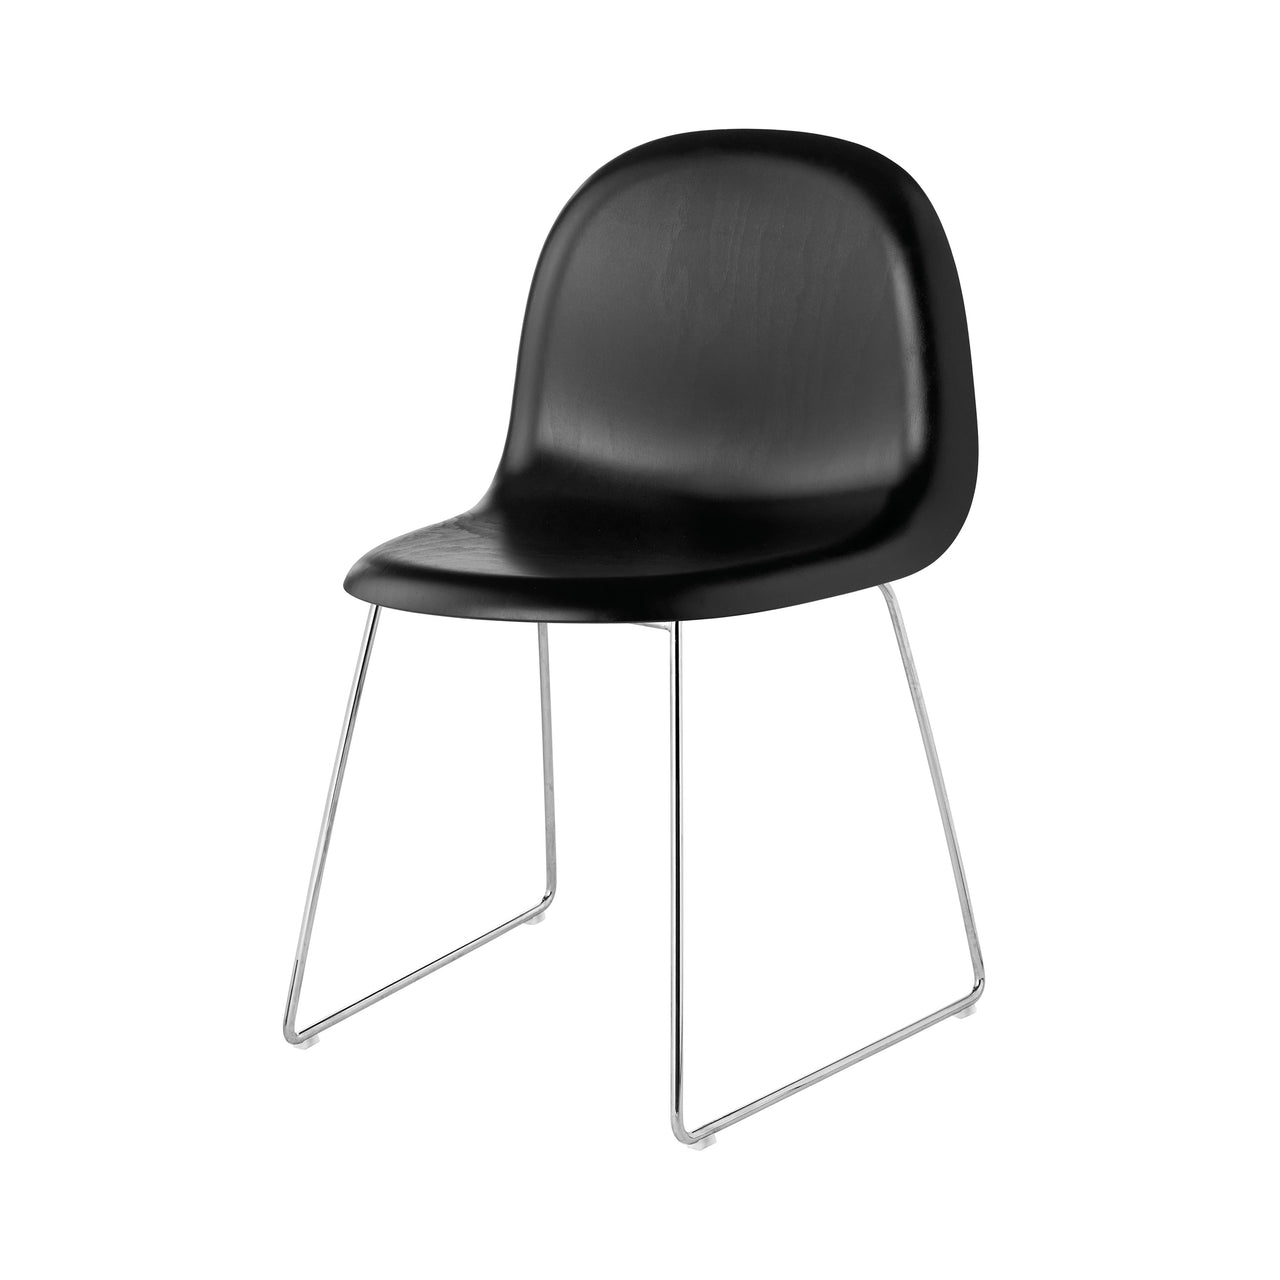 3D Dining Chair: Sledge Base + Black Stained Beech + Chrome